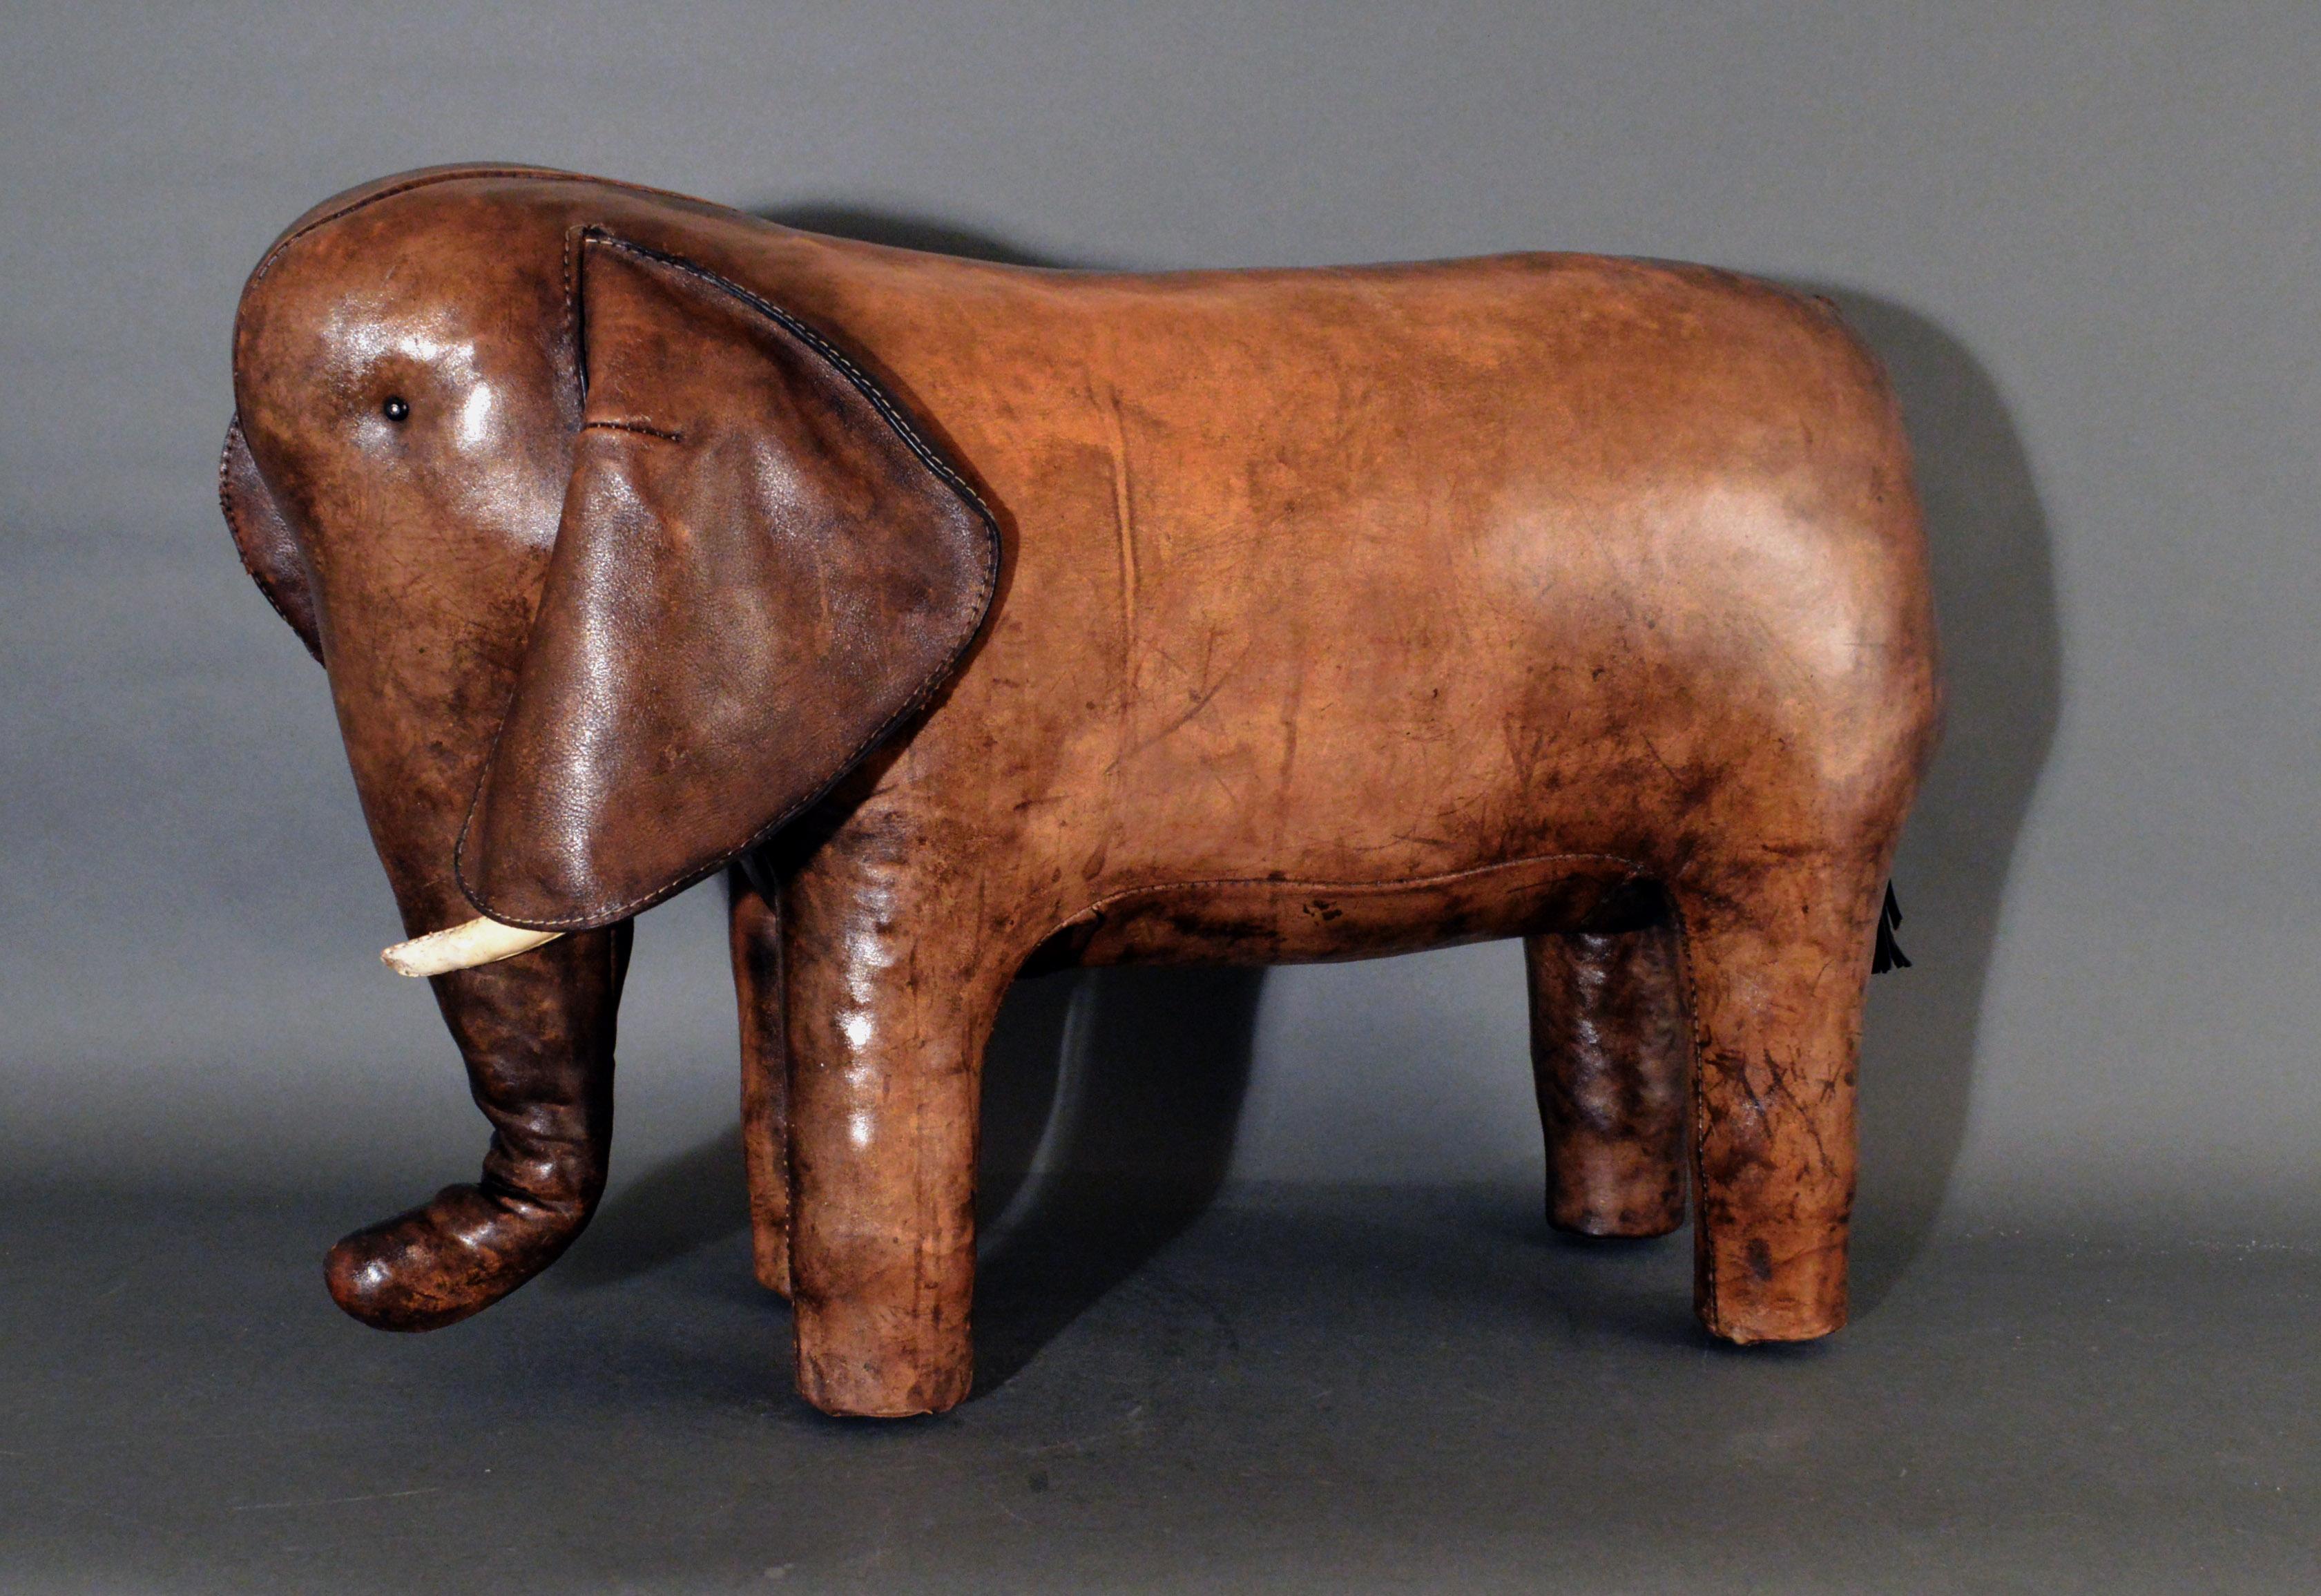 Vintage leather elephant footstool,
Dimitri Omersa, England for Abercrombie & Fitch,
1960s

The elephant was the first new animal to be produced by Dimitri Omersa for Liberty’s and soon after made for Abercrombie & Fitch. This elephant was made